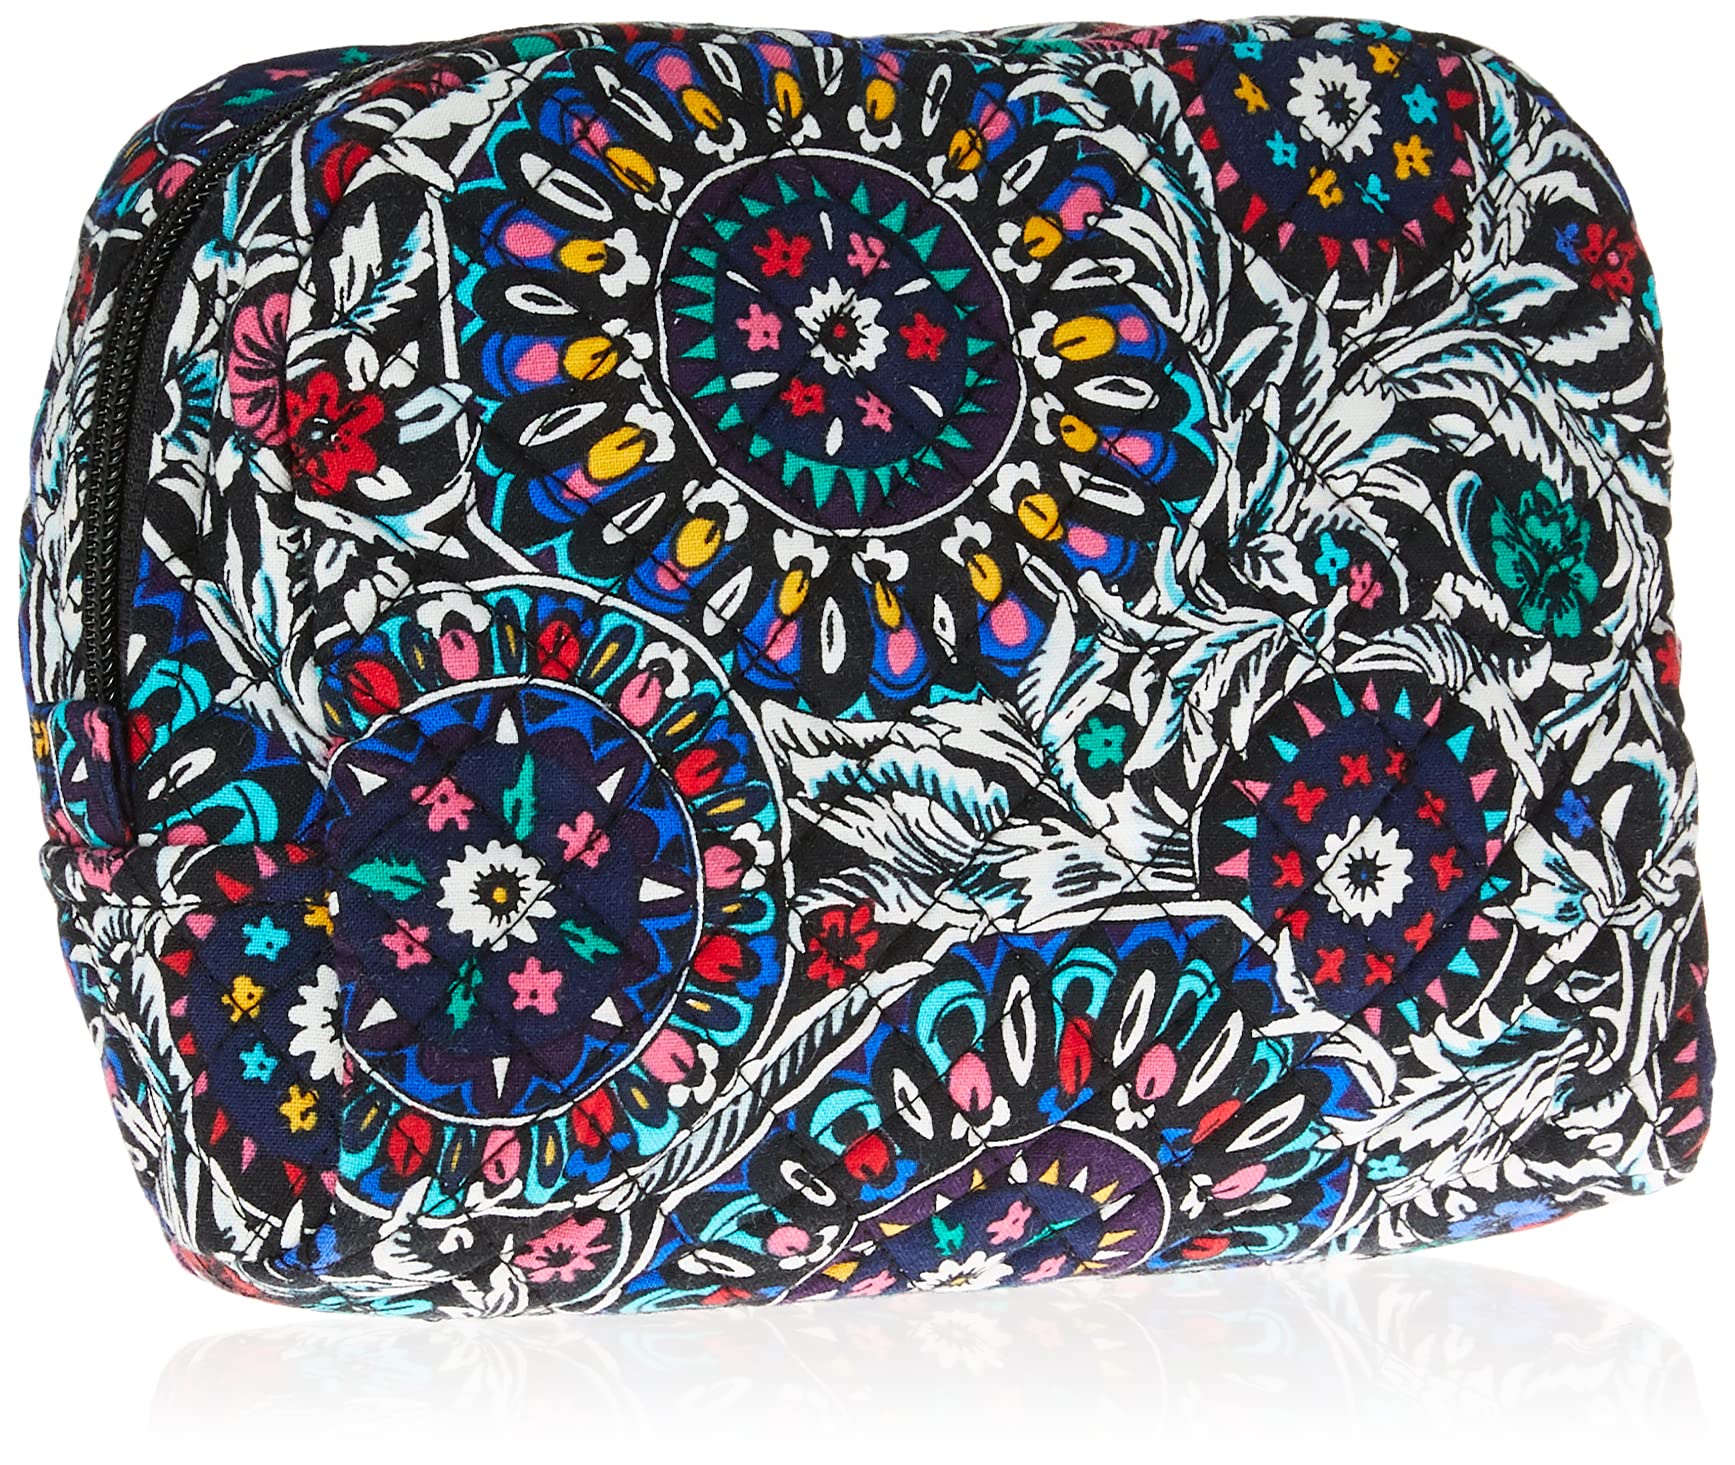 Vera Bradley Women's Cotton Medium Cosmetic Makeup Organizer Bag, Stained Glass Medallion - Recycled Cotton, One Size